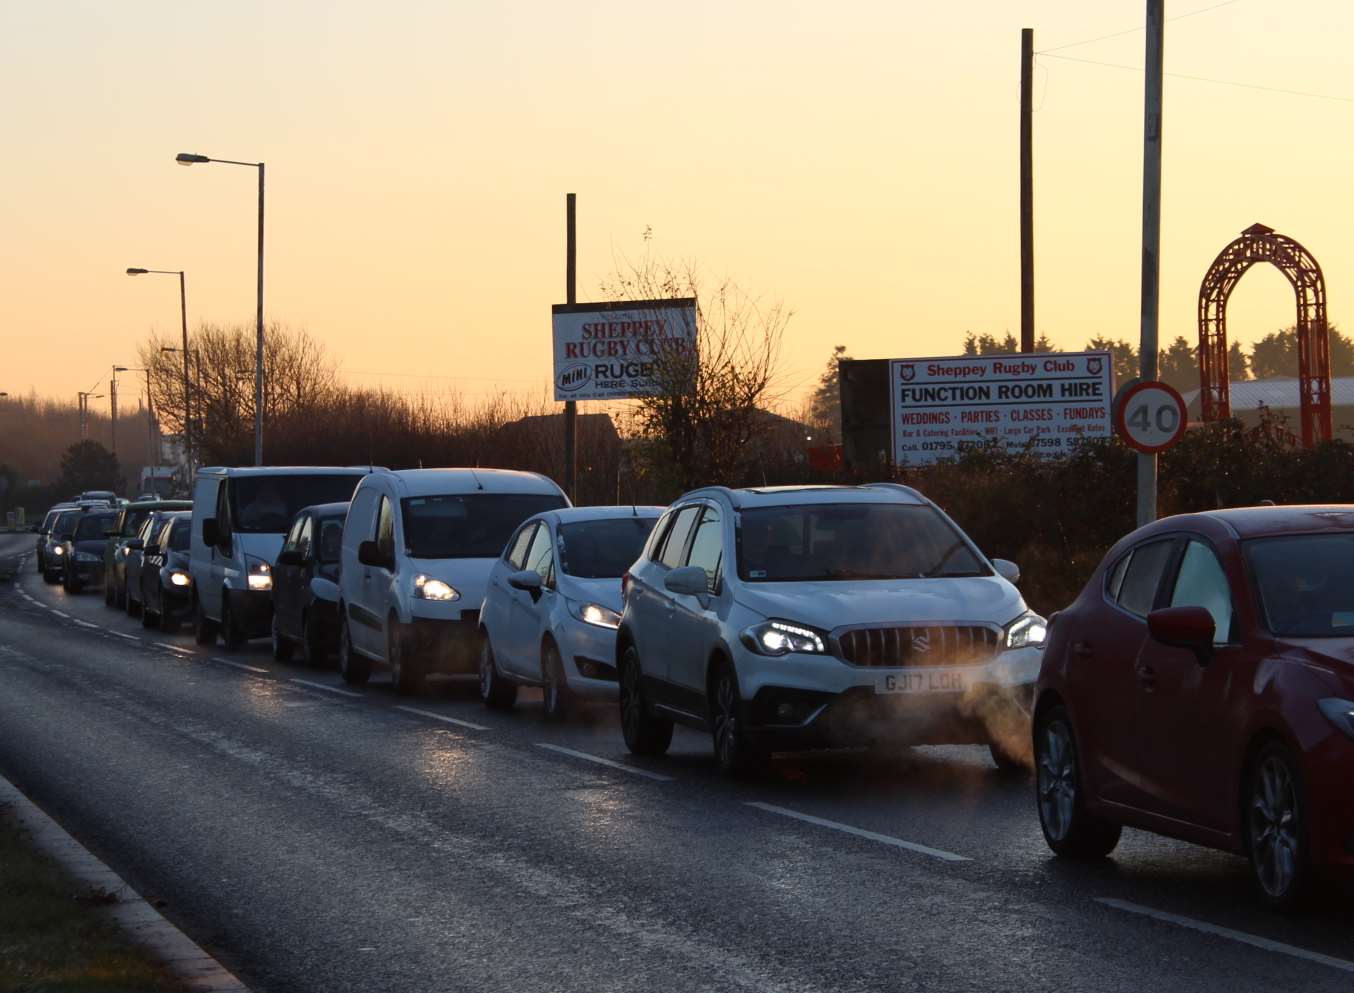 Queues were stretching back past Sheppey Rugby Club and towards Scocles Road